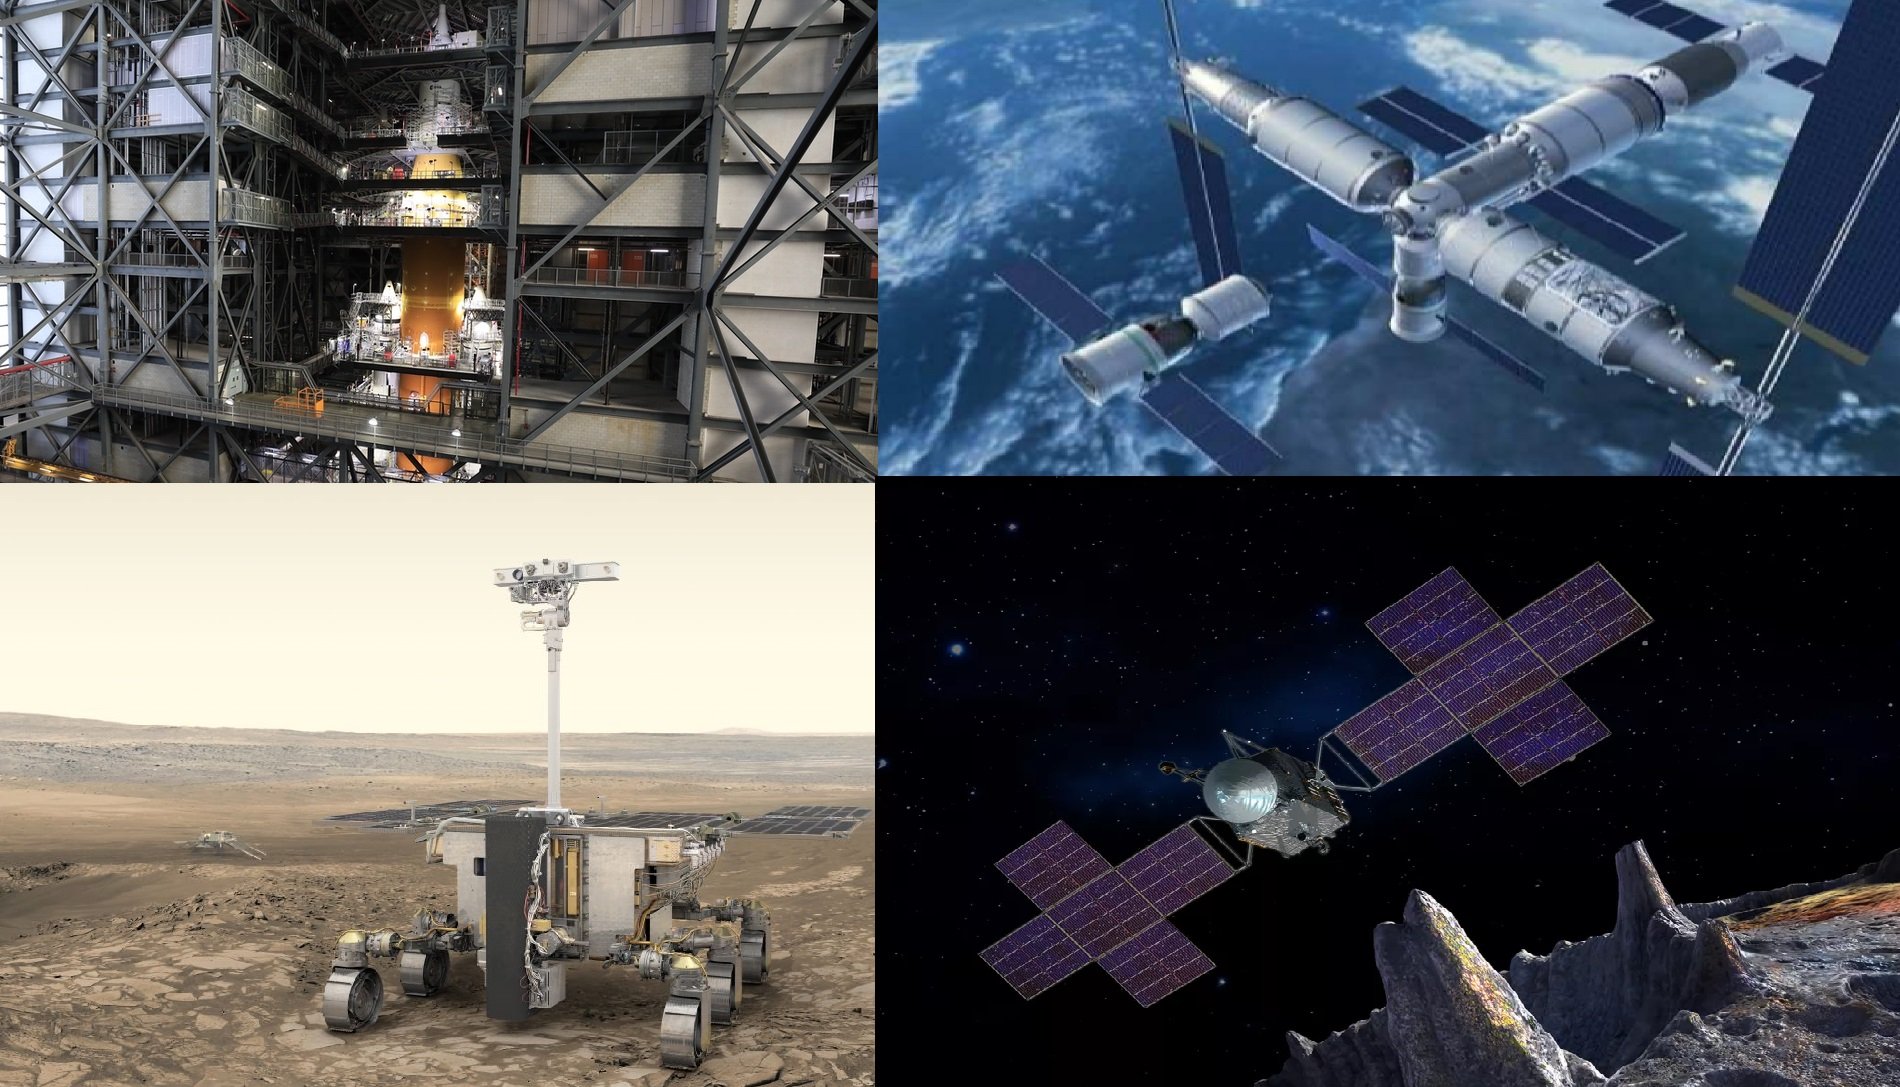 2022 Space Missions: A New Space Station, Moon Mining, A Mars Rover and Webb’s Debut